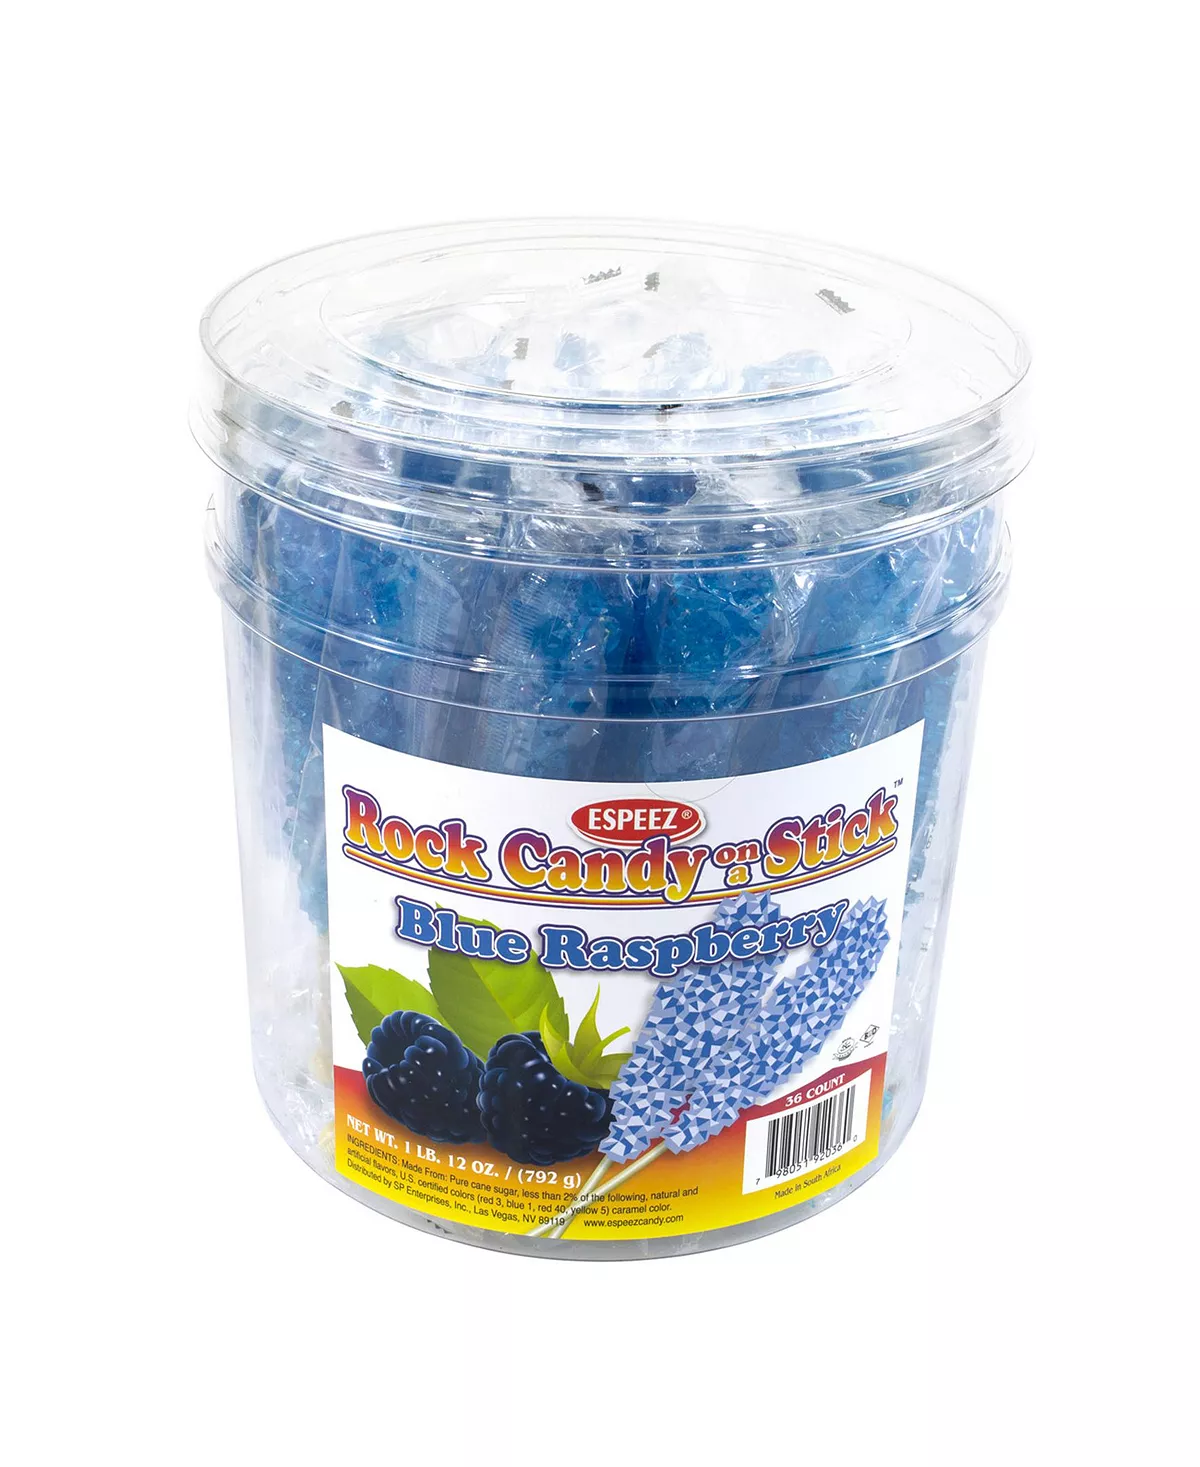 Royal Blue Raspberry-Flavored Rock Candy Sticks, 36 Count